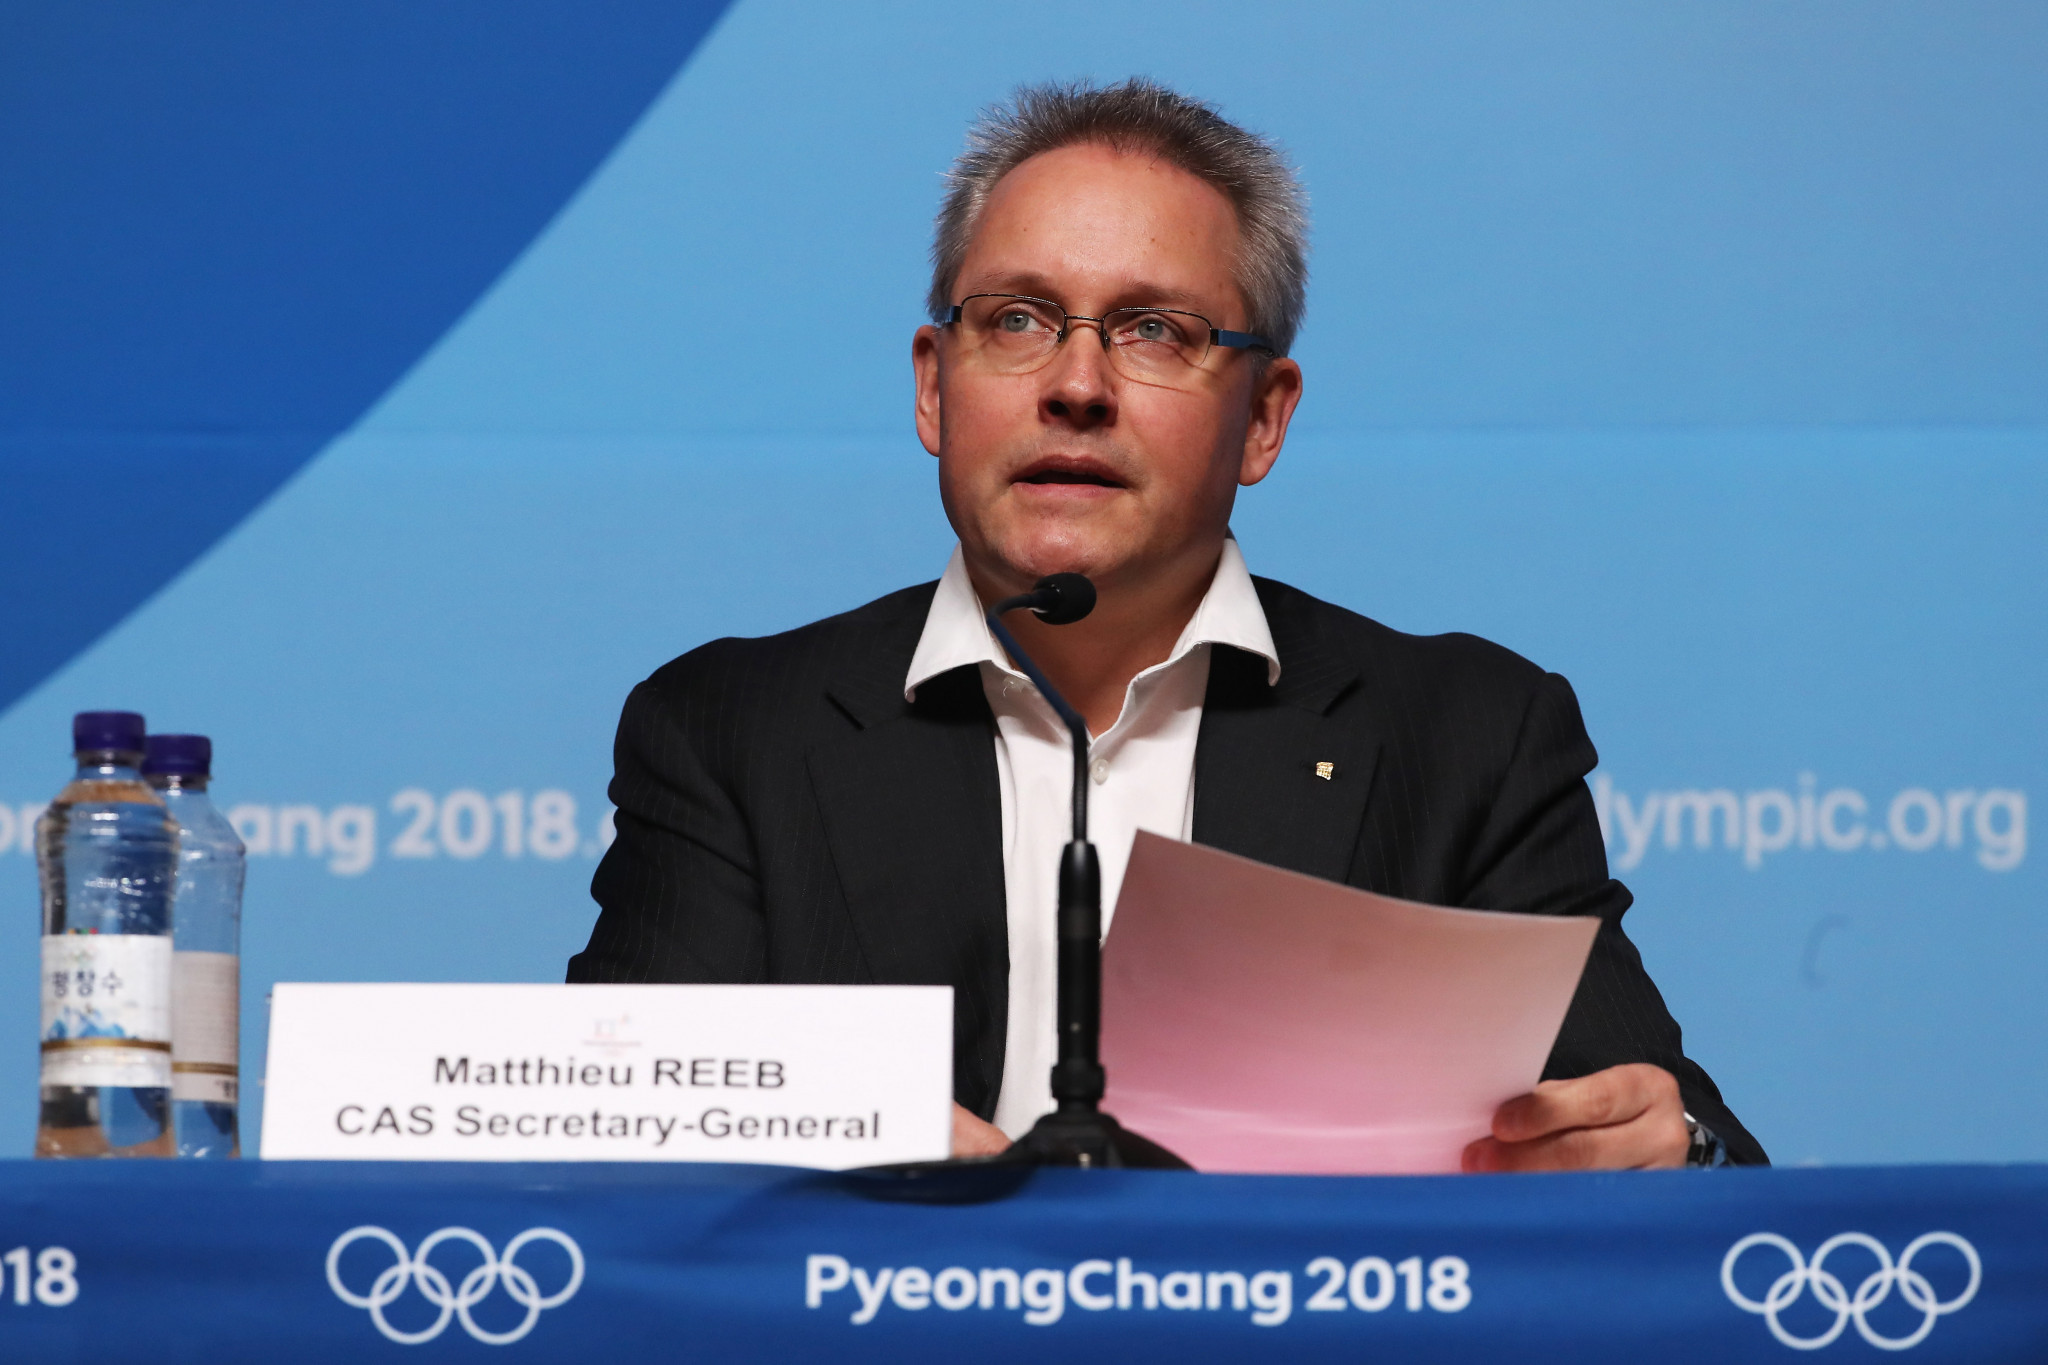 CAS unable to prove any of the "factual allegations" made by IOC in decision to sanction Russian skier